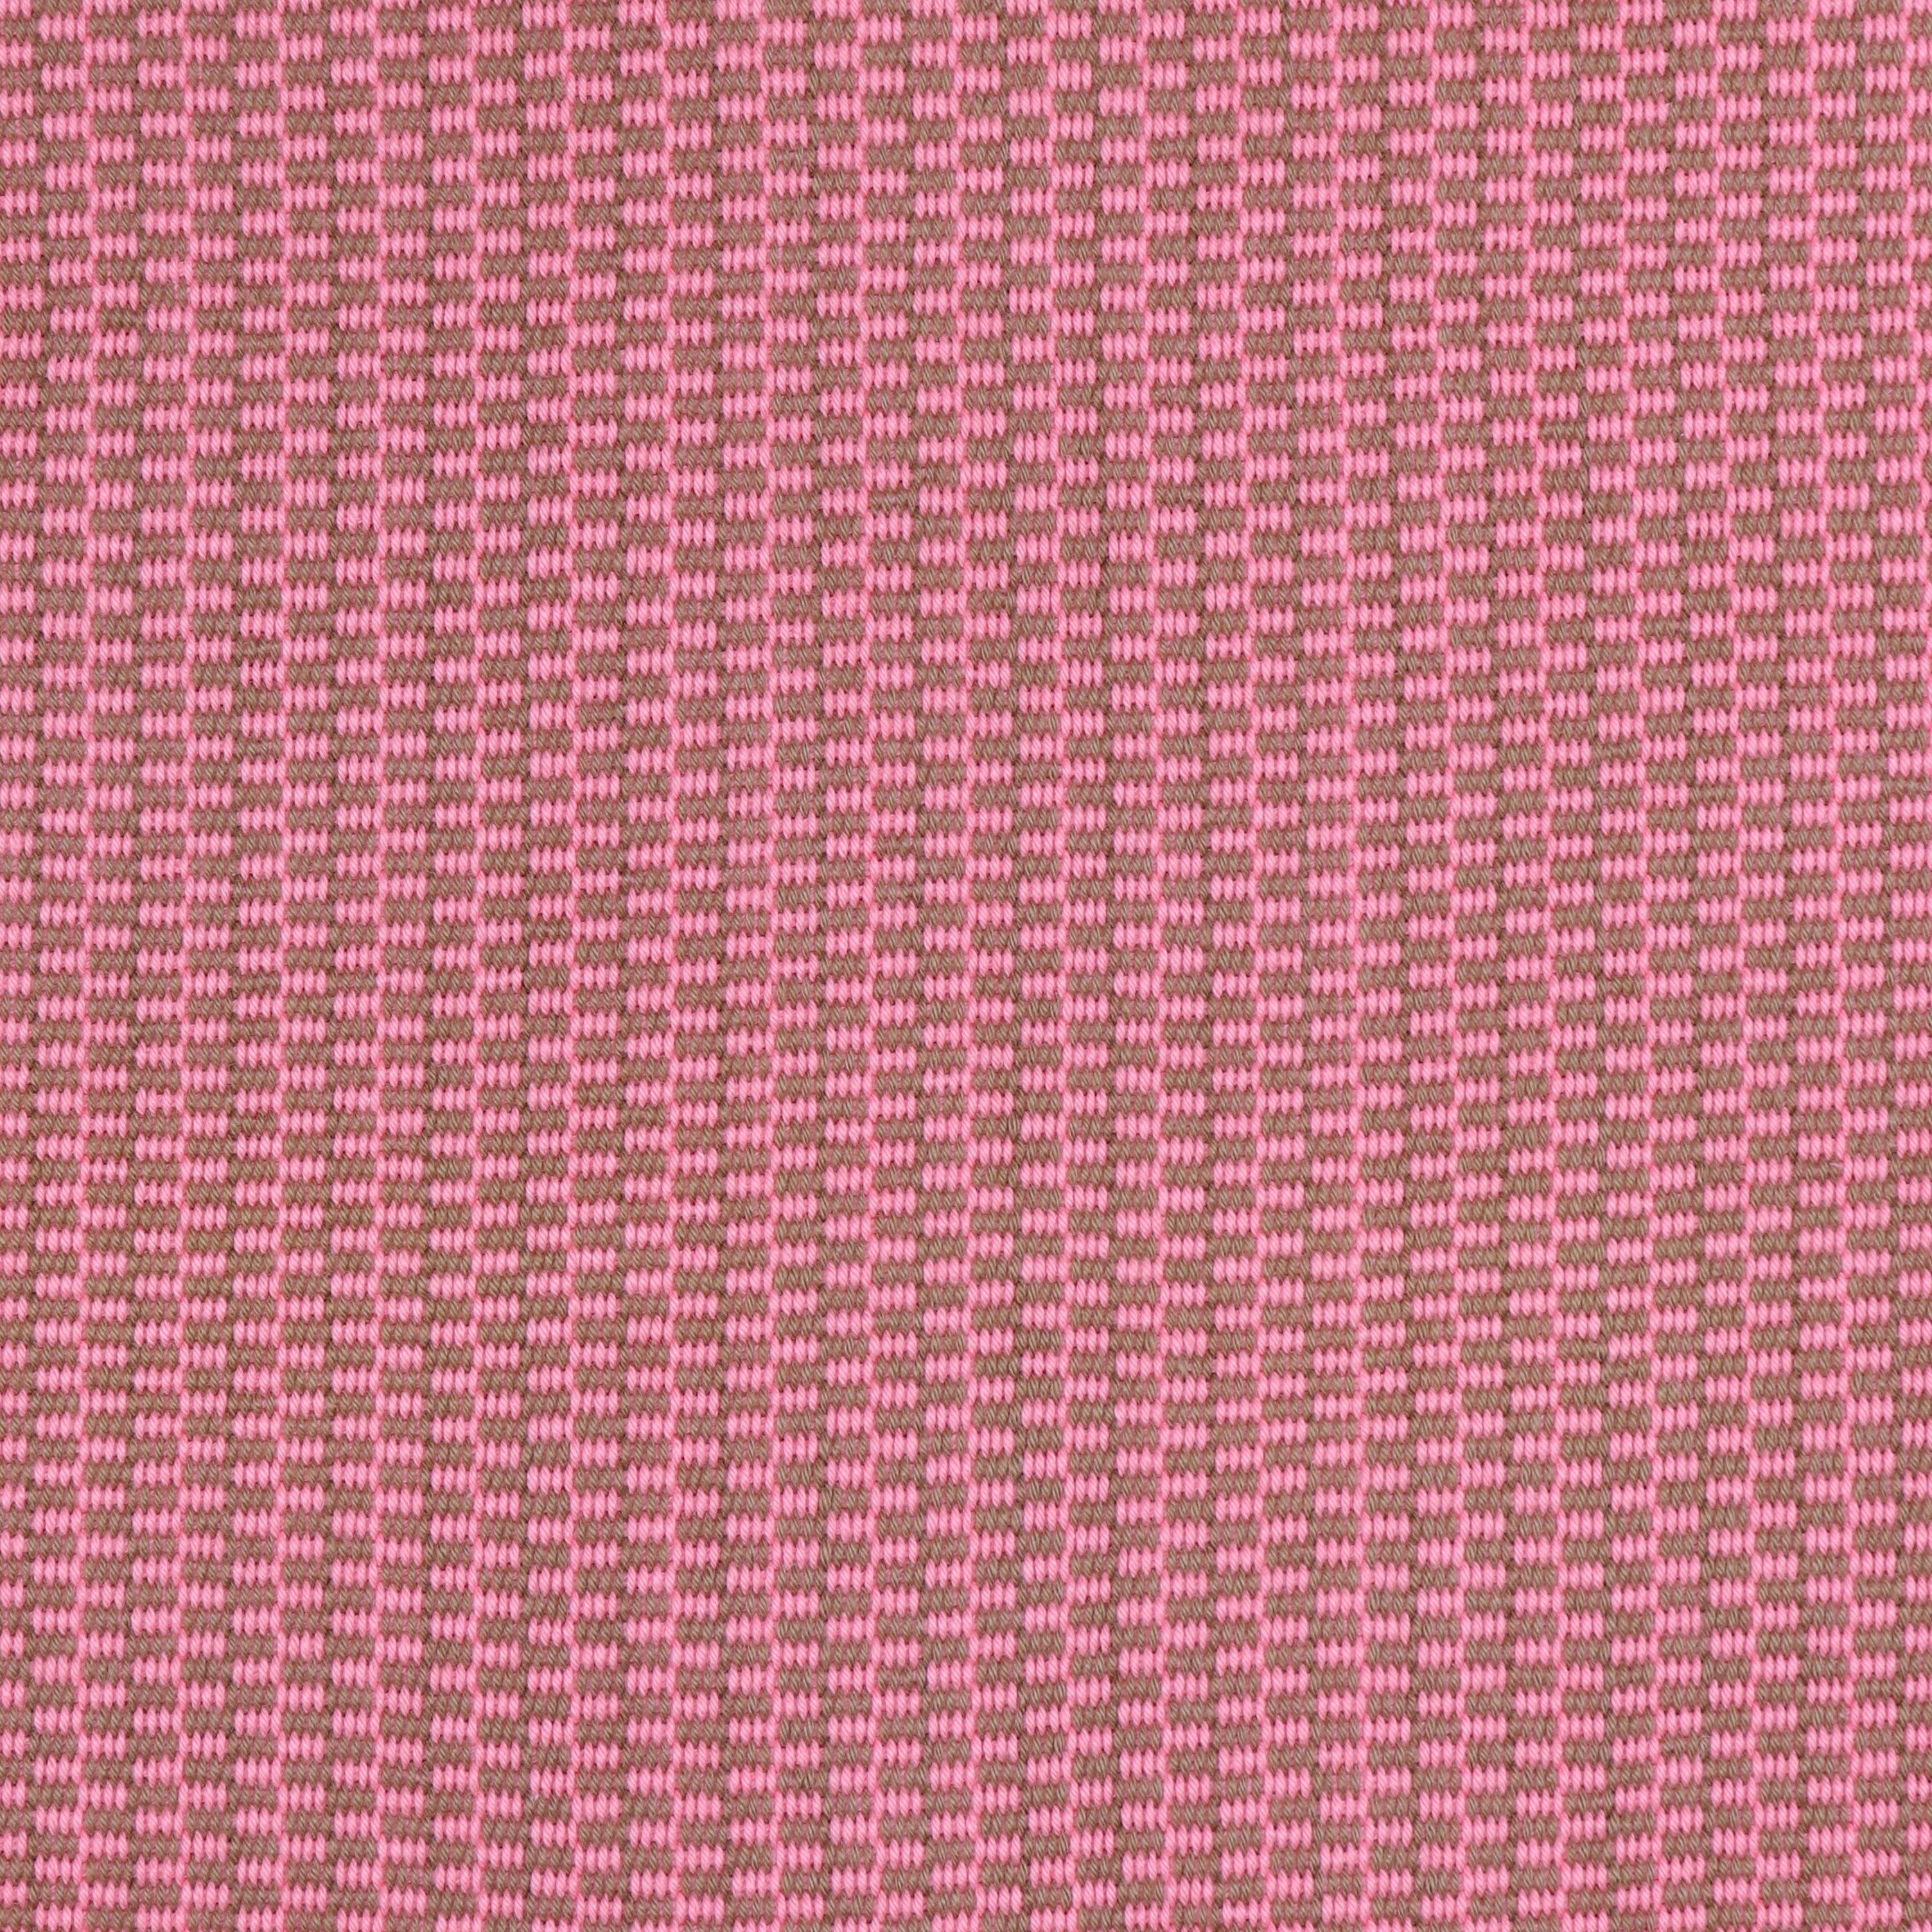 Detail of a hand-woven cotton fabric in a grid pattern in pink and brown.